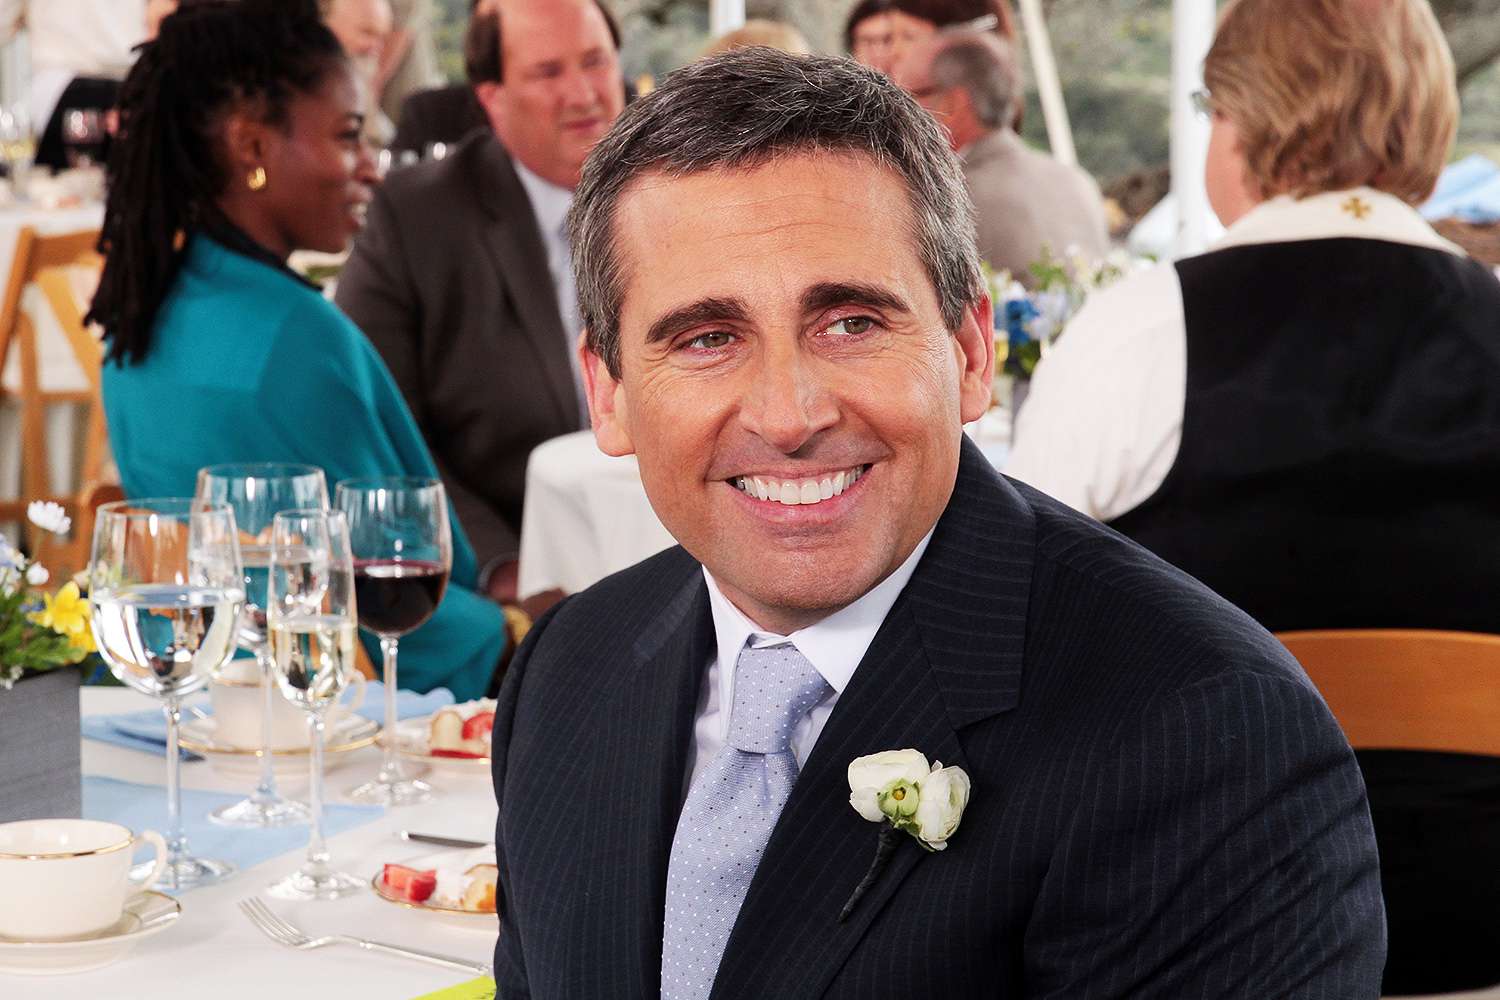 Steve Carell's Appearance in the Finale of “The Office” 'Was a Big Reveal' — Even for the Cast: 'Swore Us to Secrecy'